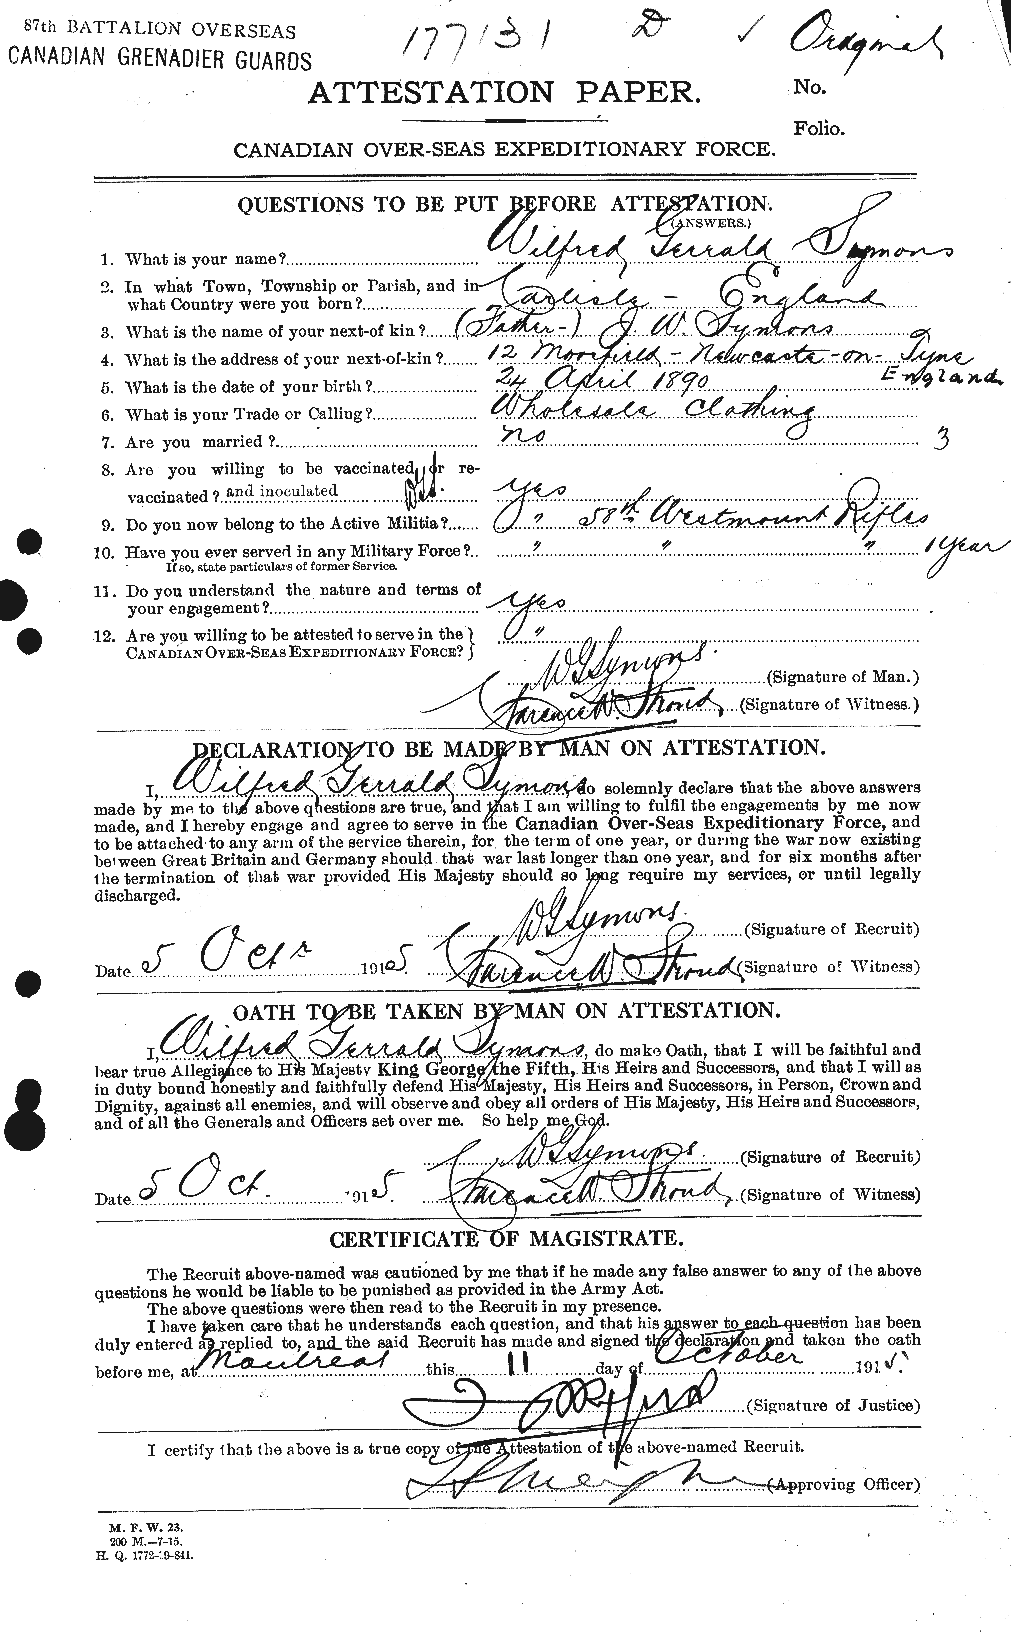 Personnel Records of the First World War - CEF 129018a